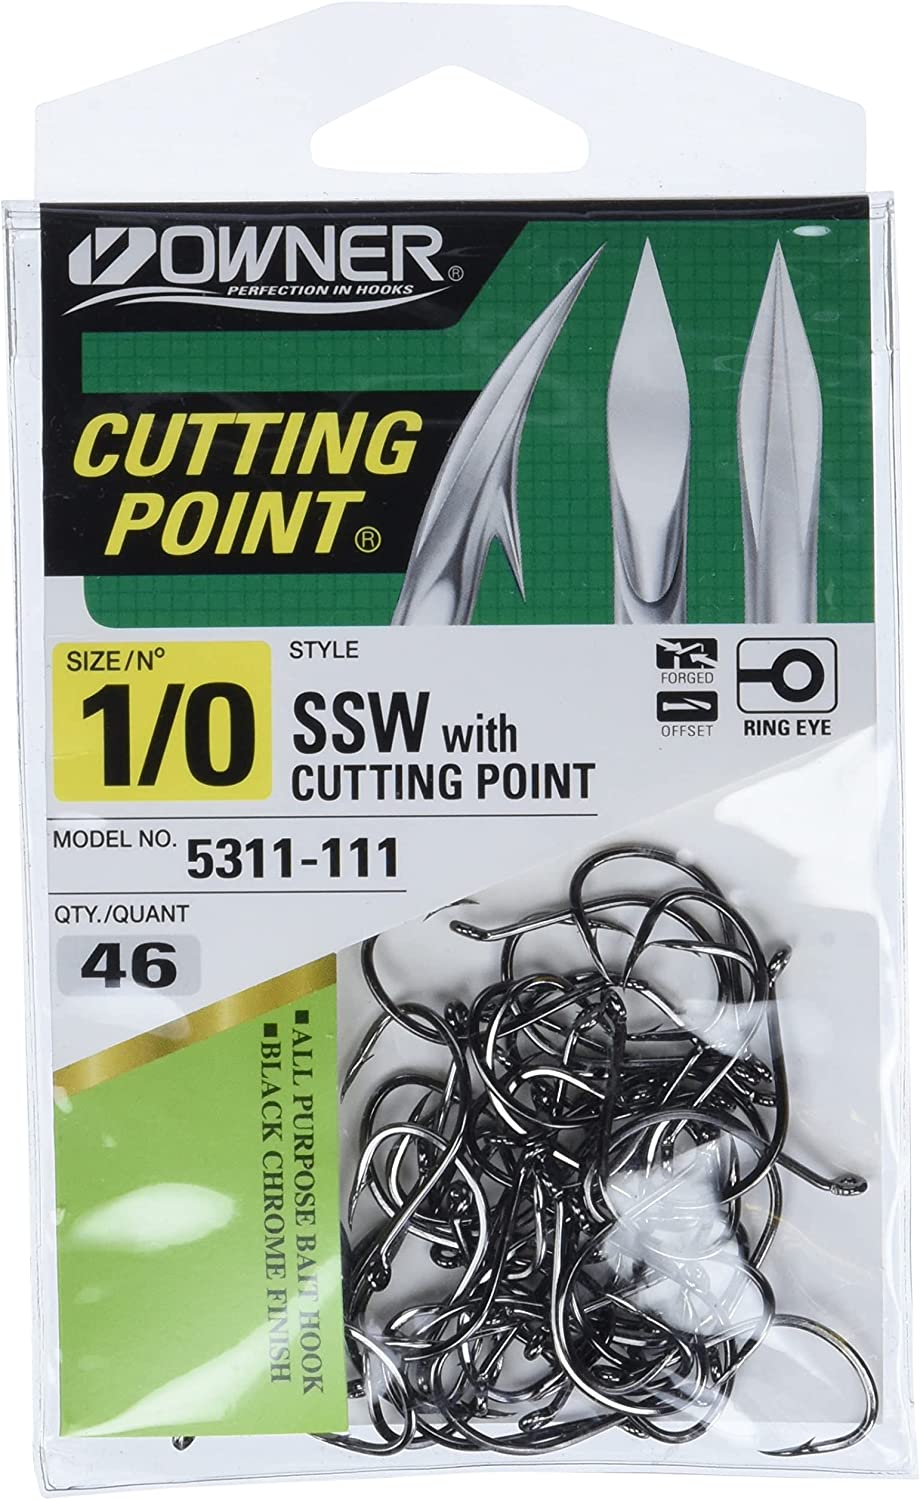 Owner SSW Cutting Point Hooks Size: 1/0